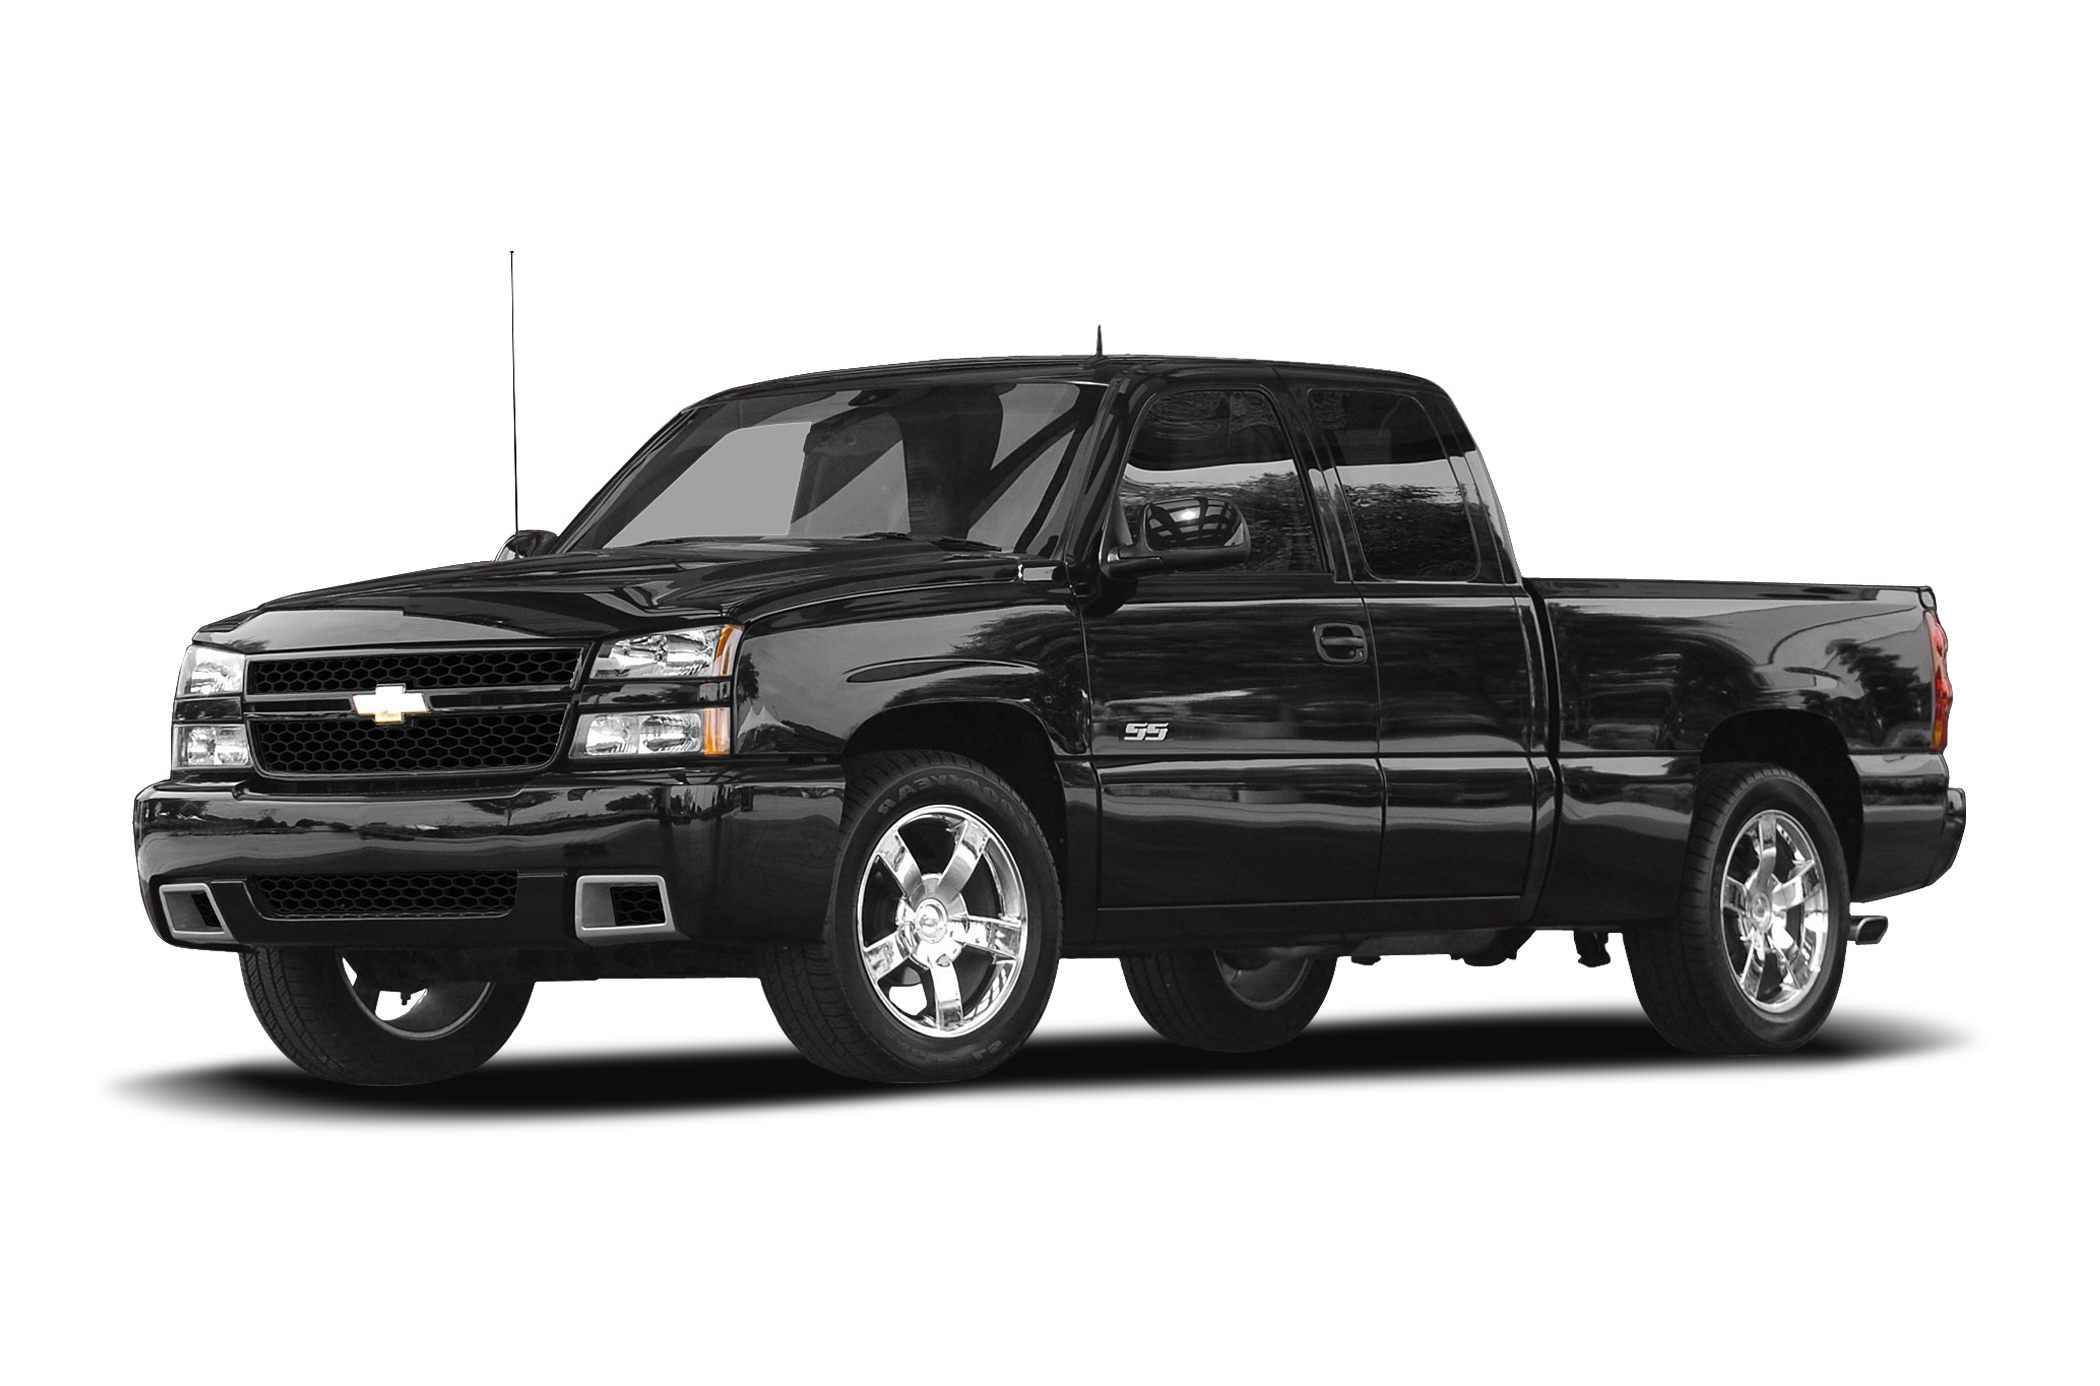 2007 Chevrolet Silverado 1500 Ss Classic Ss 4x2 Extended Cab 6 5 Ft Box 143 5 In Wb Specs And Prices